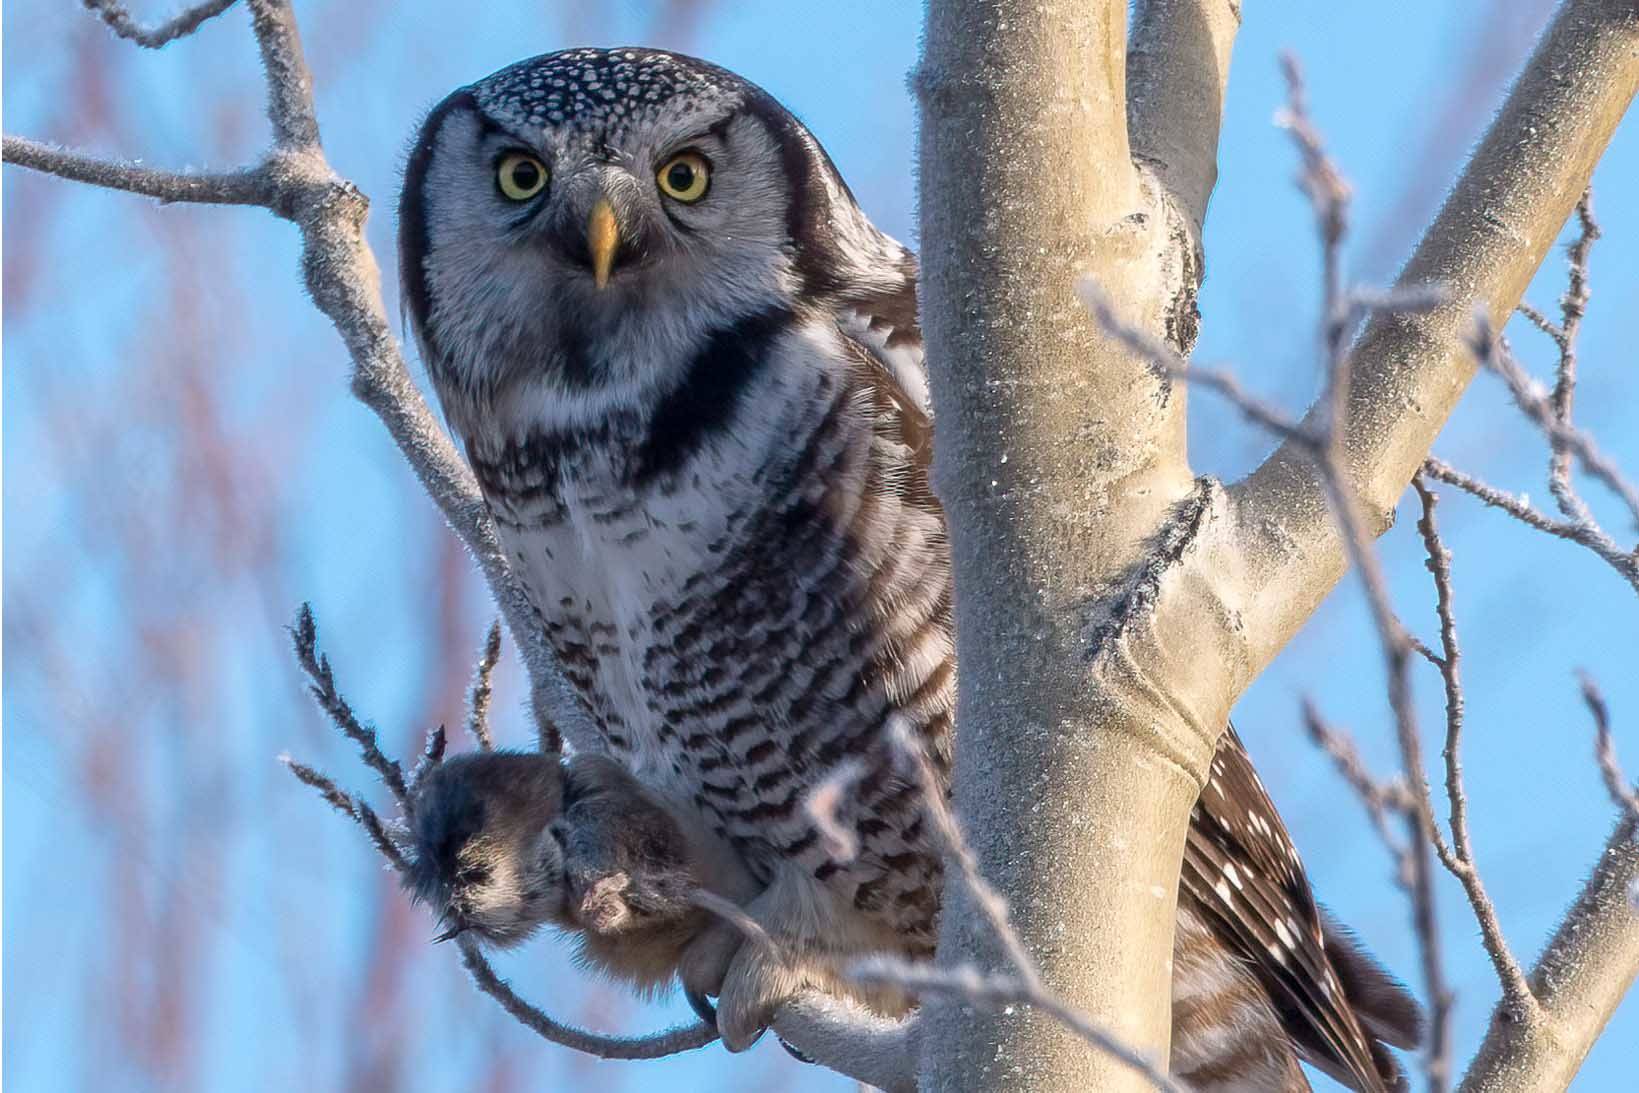 A Northern Hawk Owl clutching a red-backed vole near Watson Lake on Nov. 30, 2020. (Photo by Colin Canterbury/USFWS)